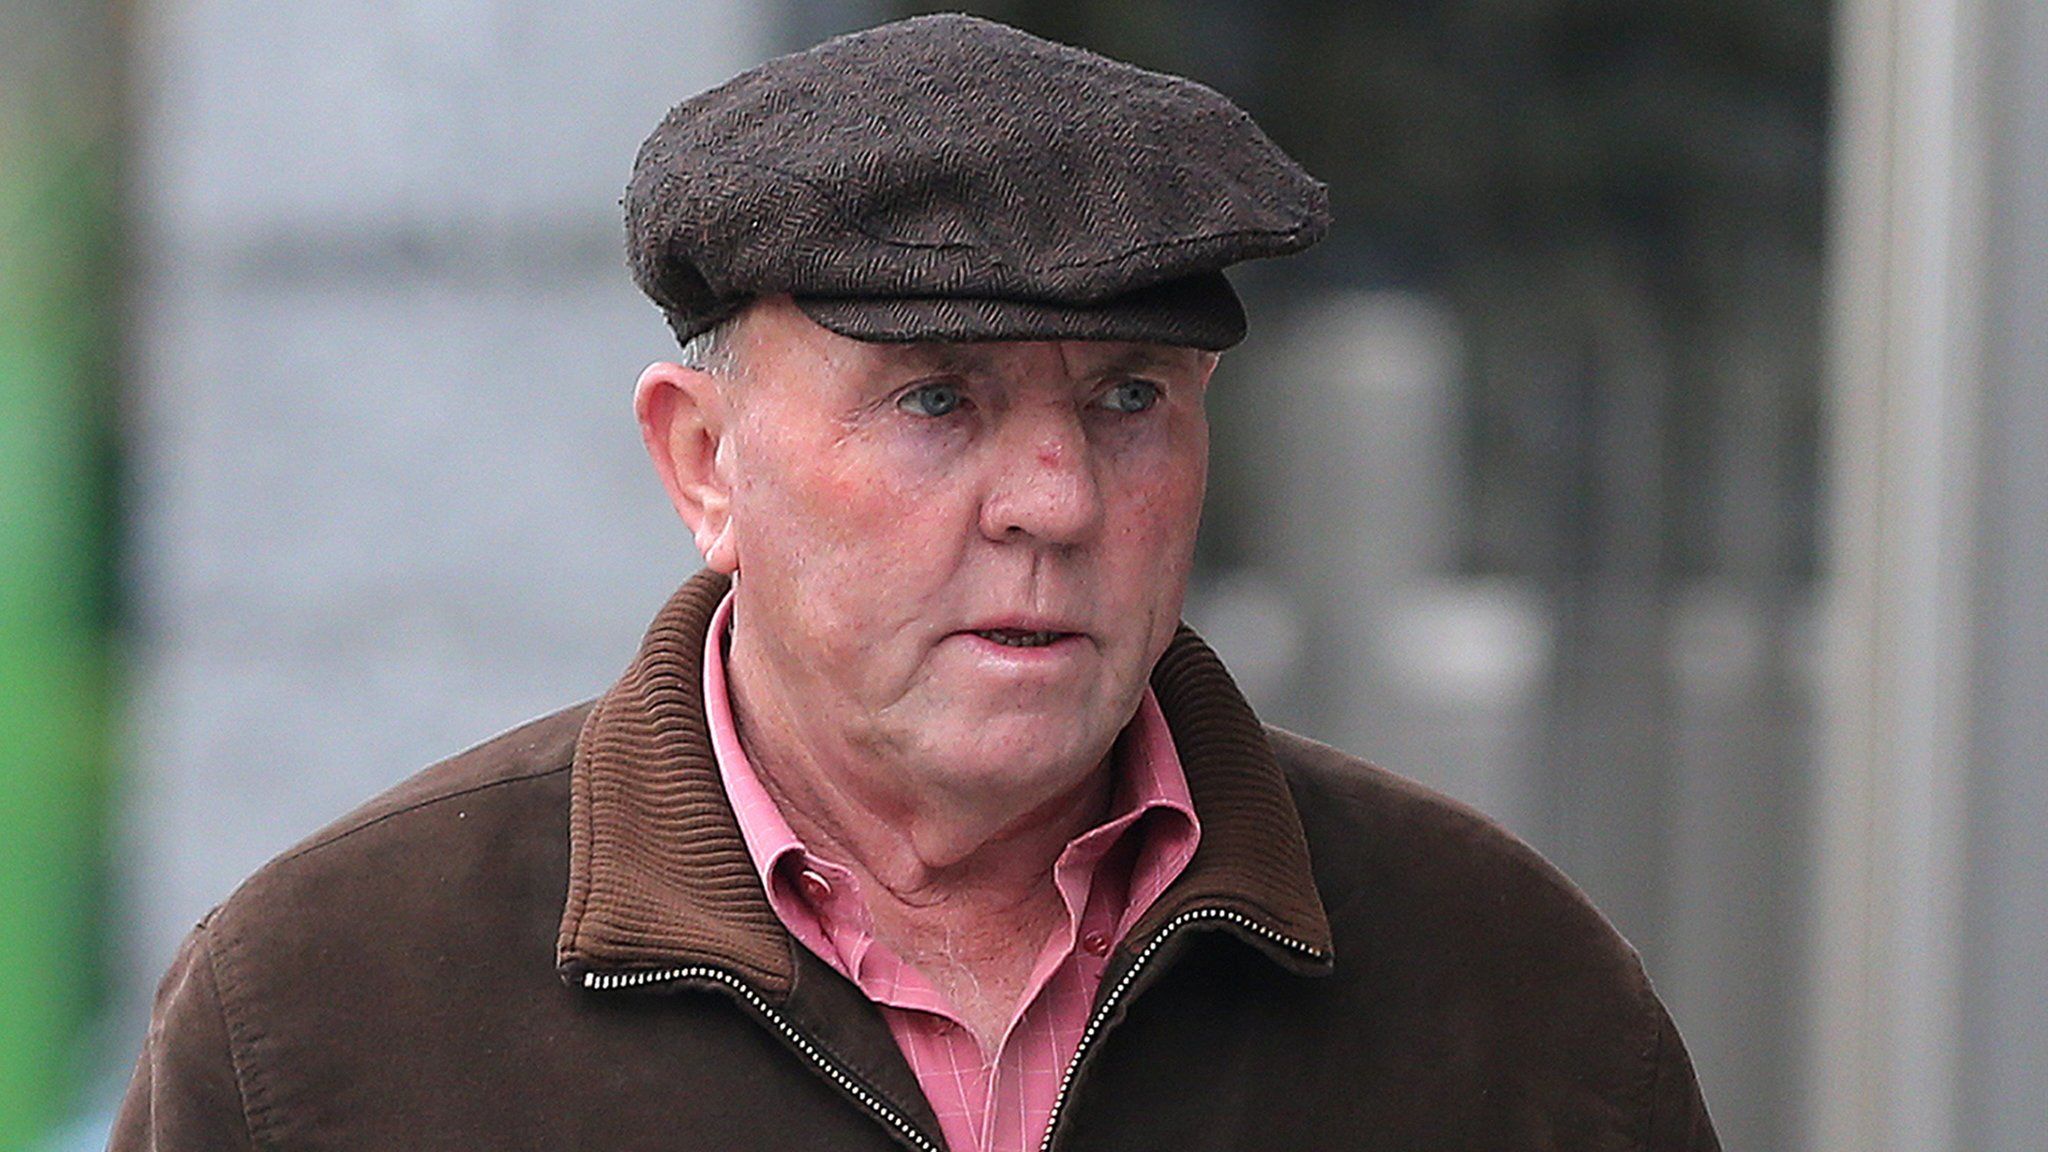 Thomas 'Slab' Murphy arrives at the Special Criminal Court in Dublin last year. He was convicted of tax offences.